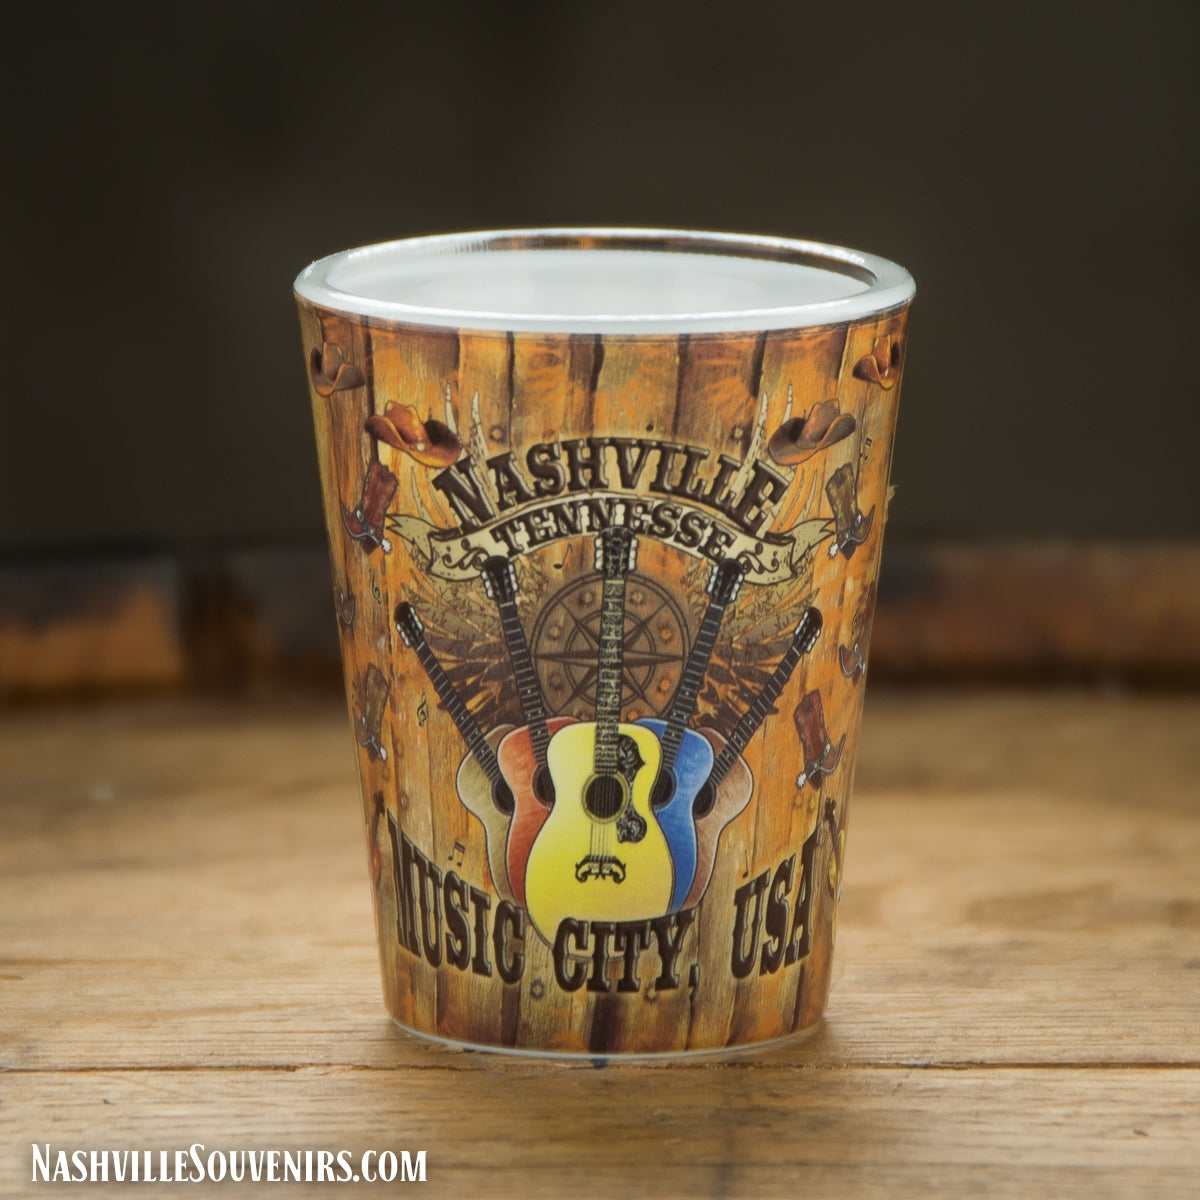 Nashville Tennessee Music City USA Shot Glass with Guitars